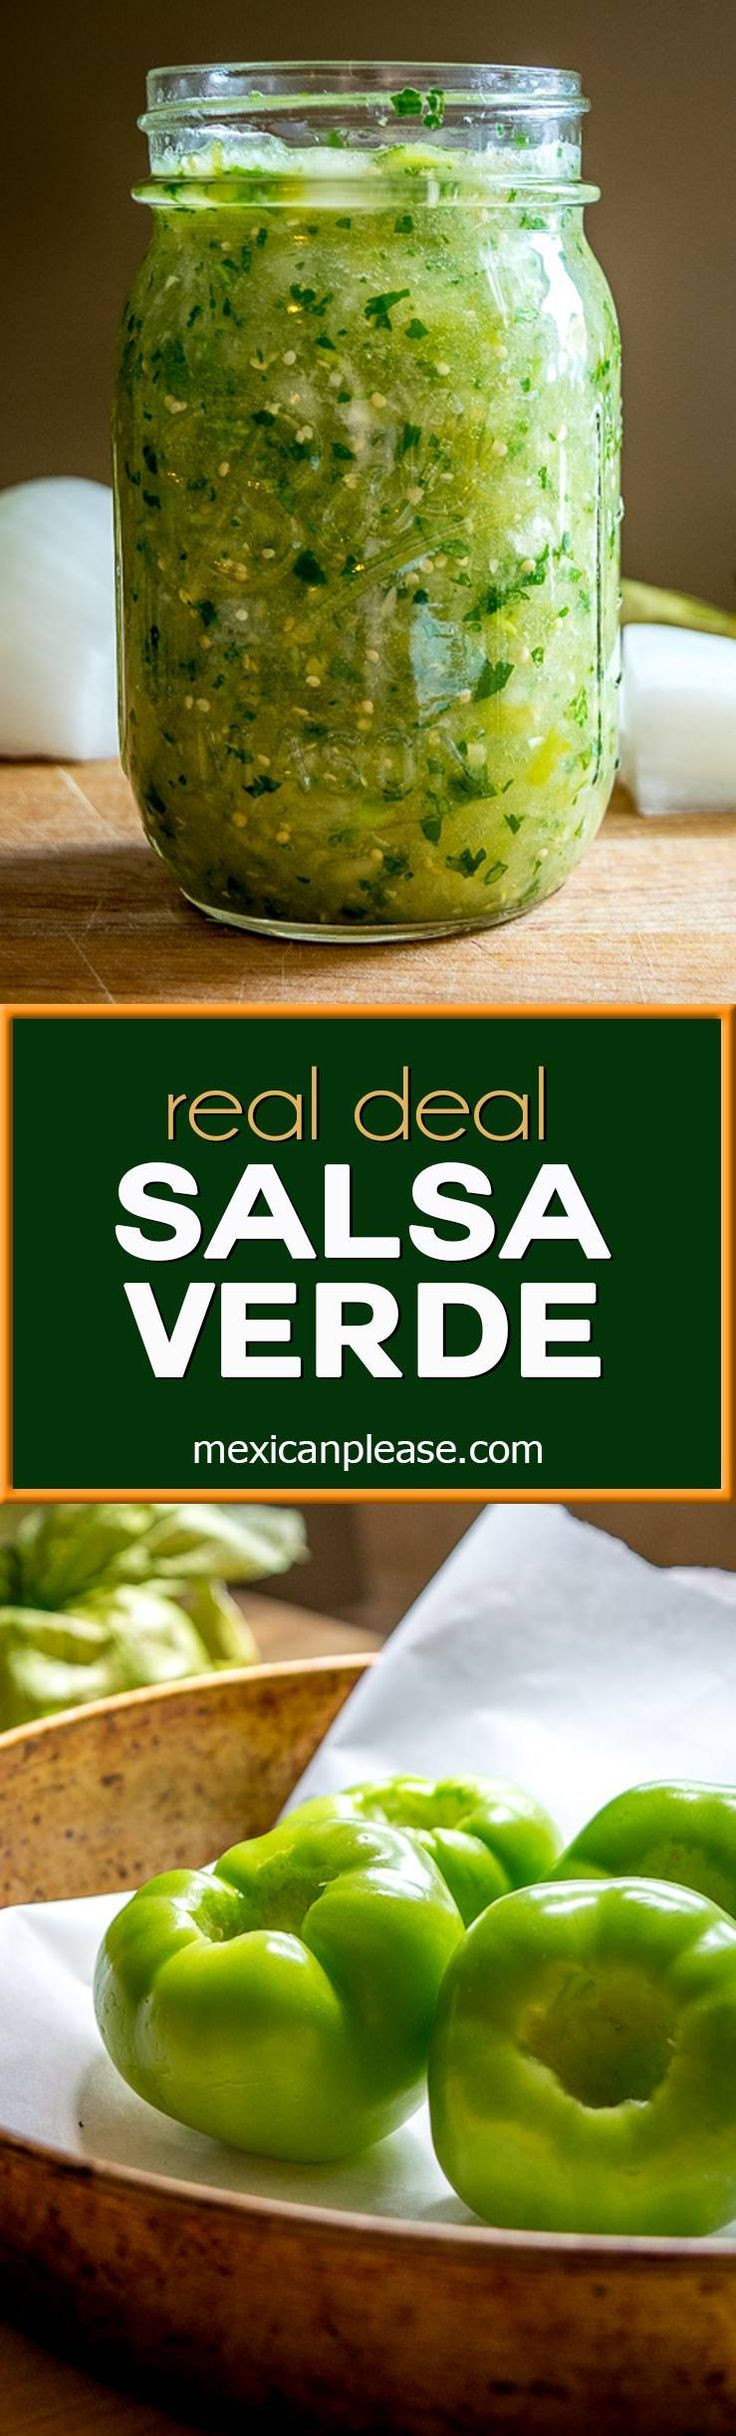 Authentic Salsa Verde Recipe For Canning
 Pin by Mexican Please on It s Delish